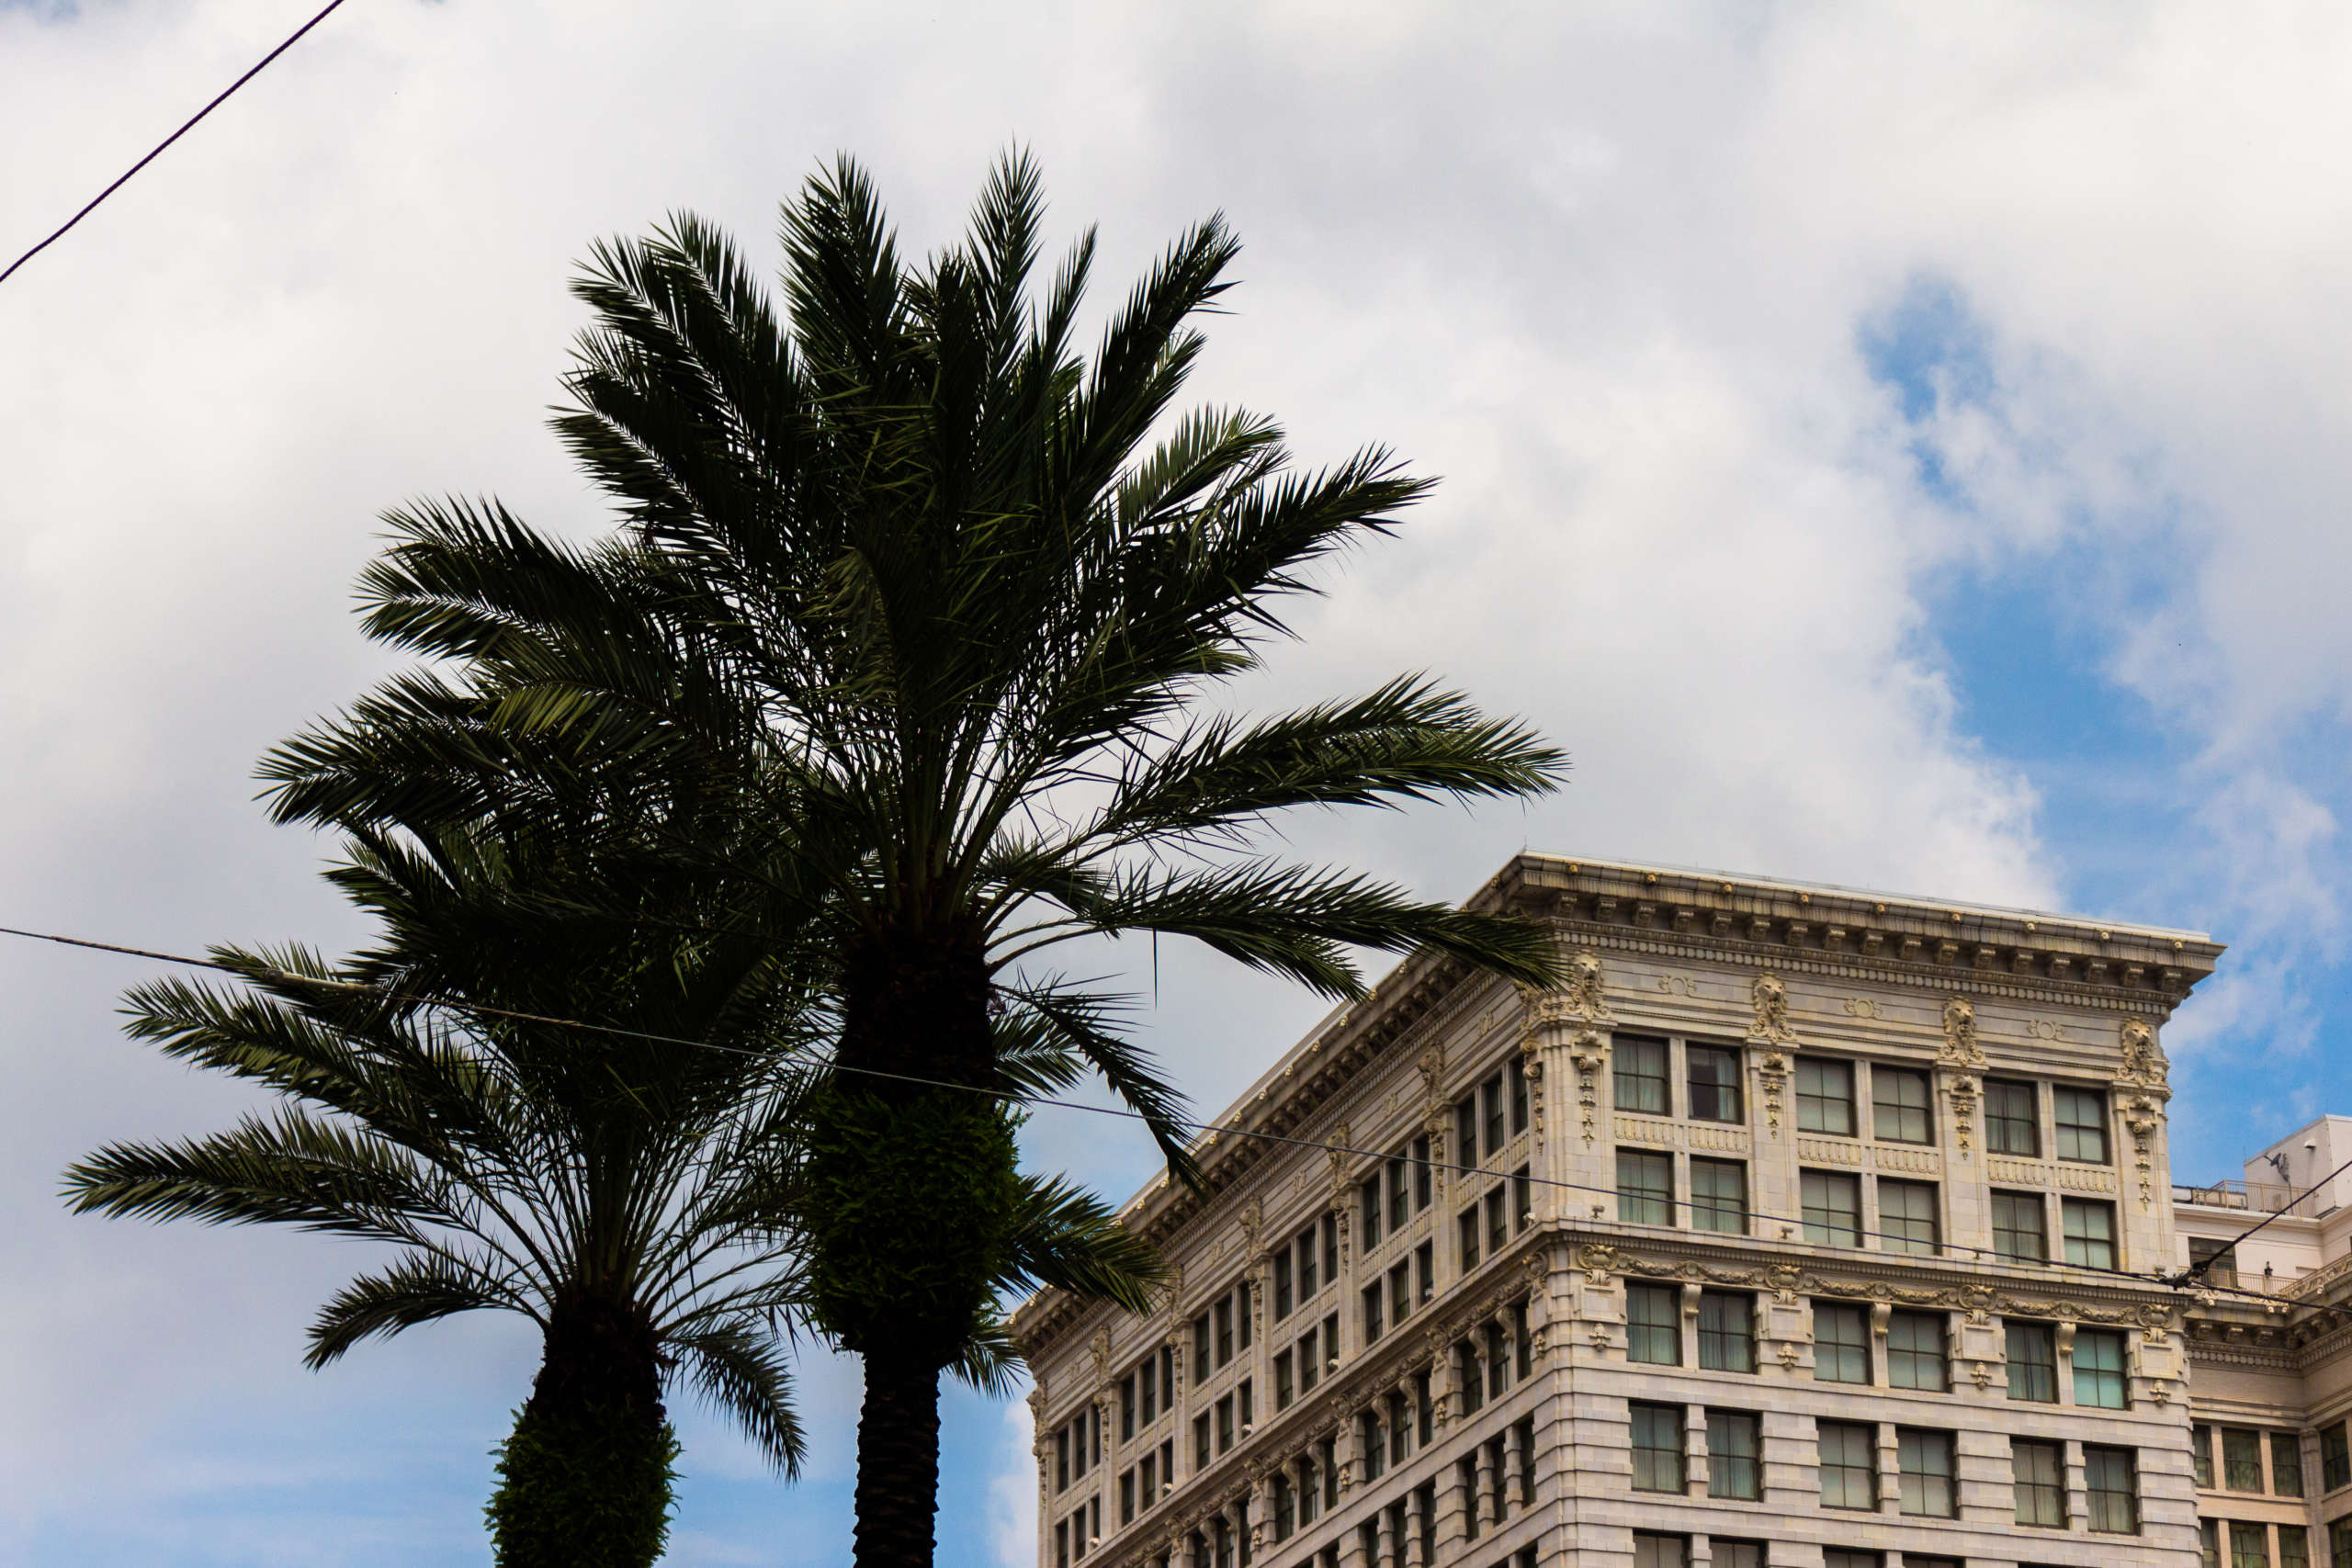 Two palm trees stand tall beside a historic building.